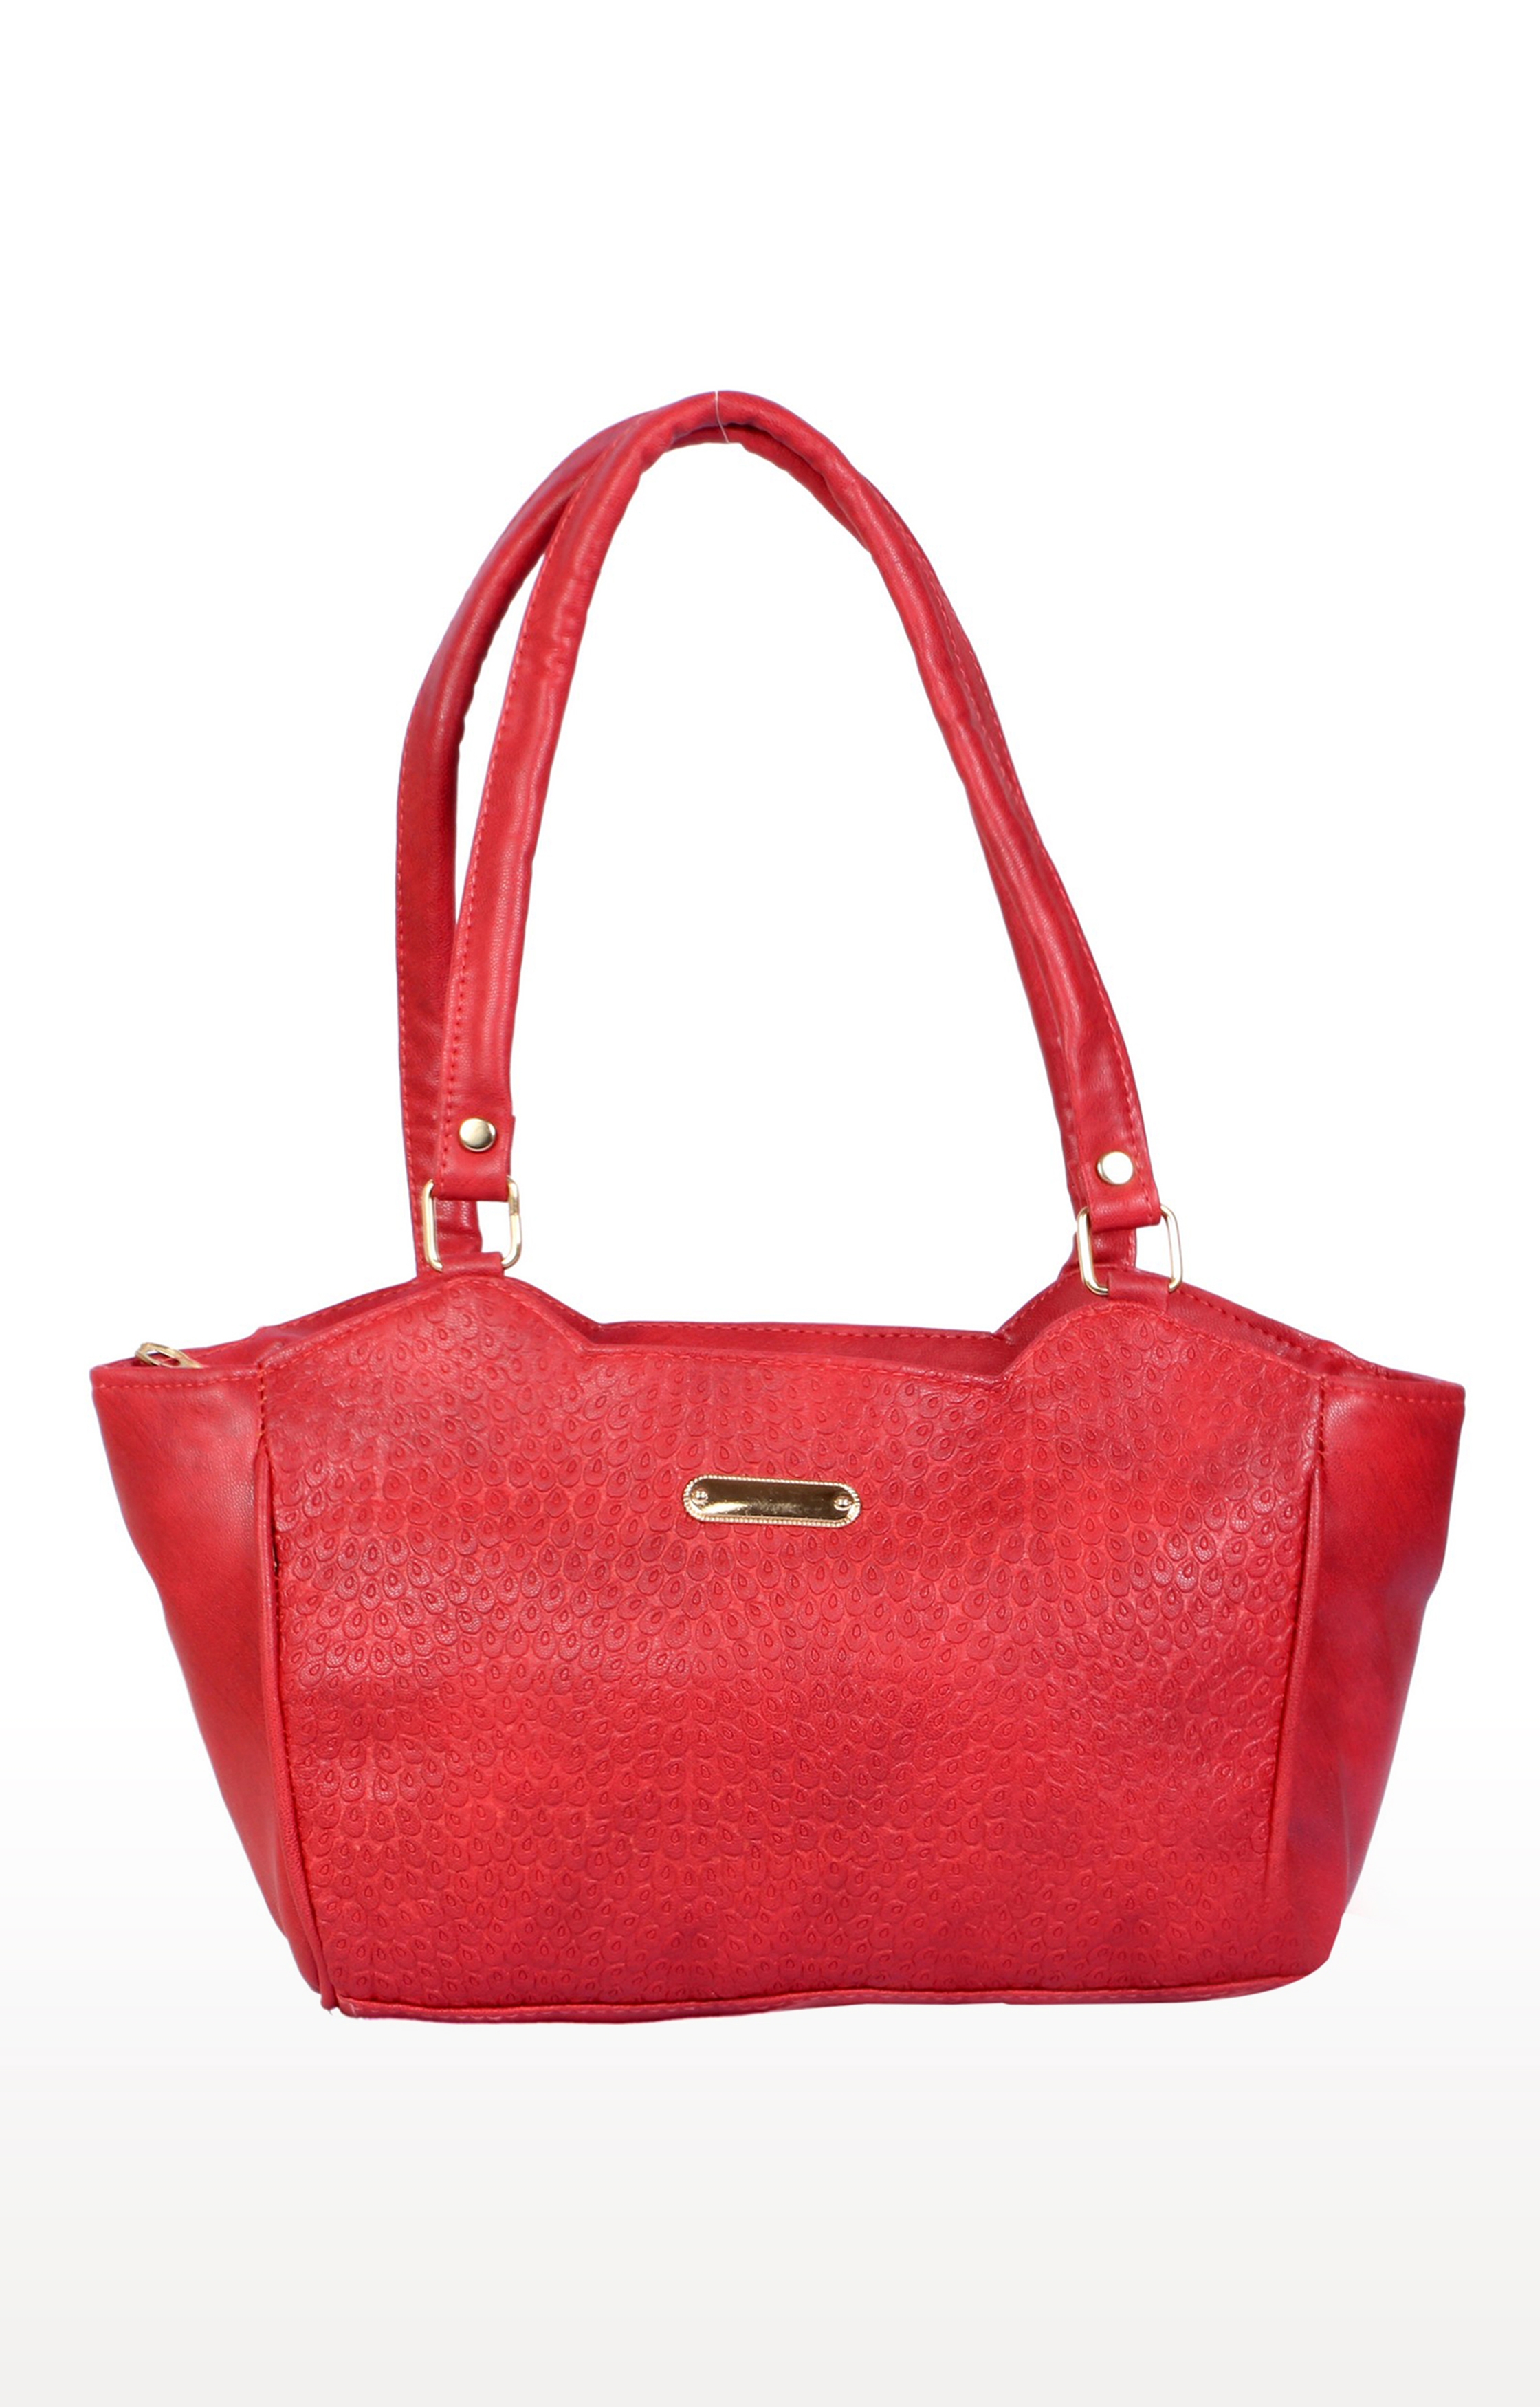 Lely's Beautiful Women's Handbag With Latest Shades -Pink